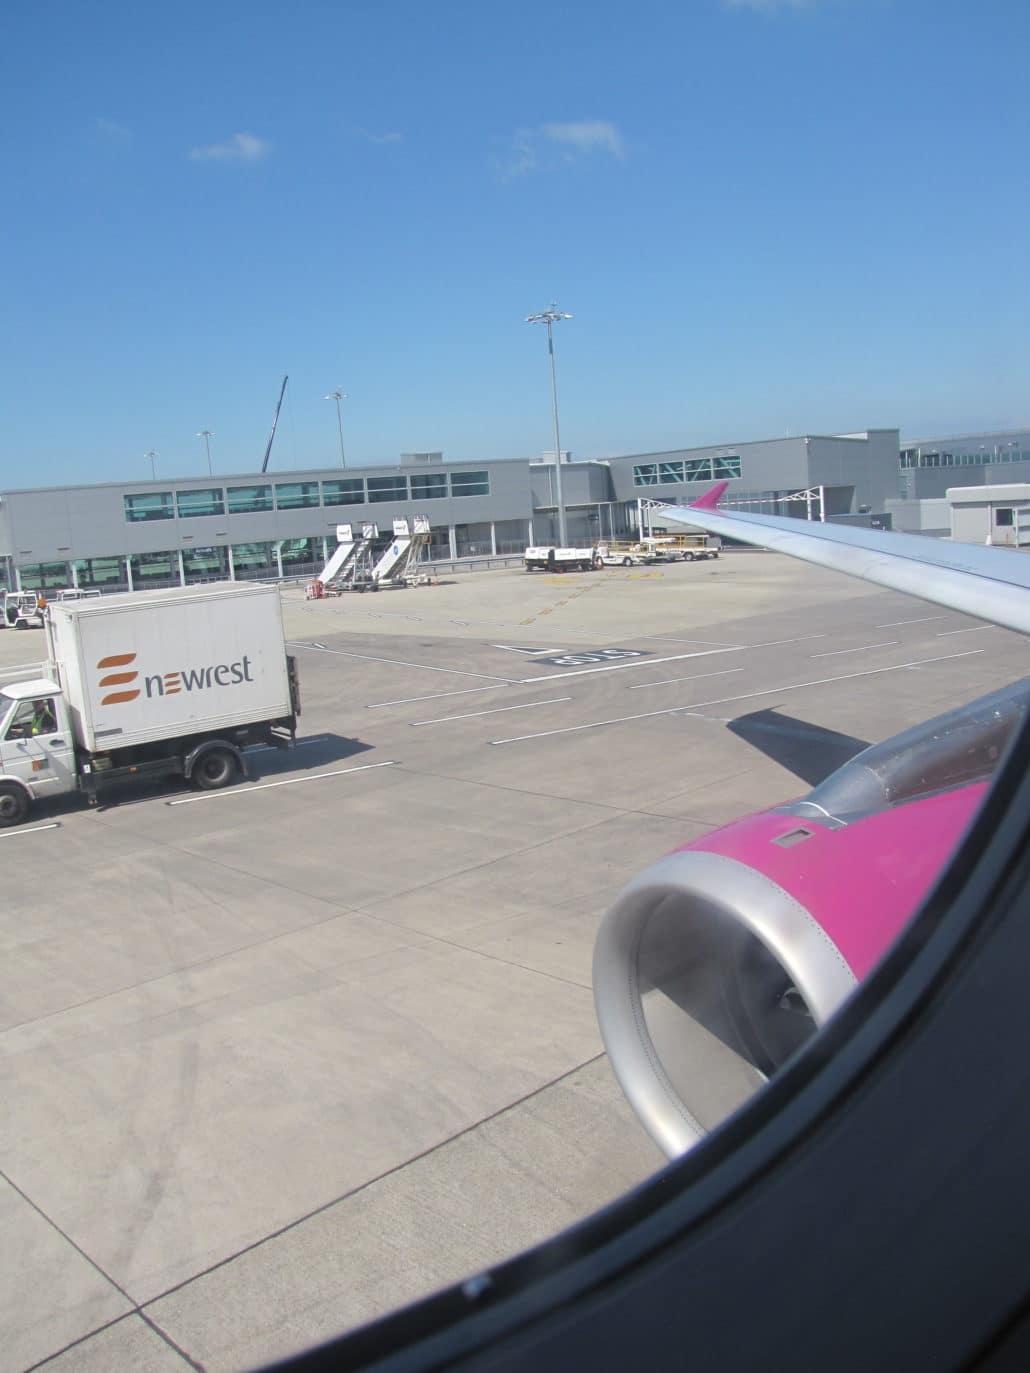 A view of Bristol’s easy-in, easy-out terminal from the aircraft